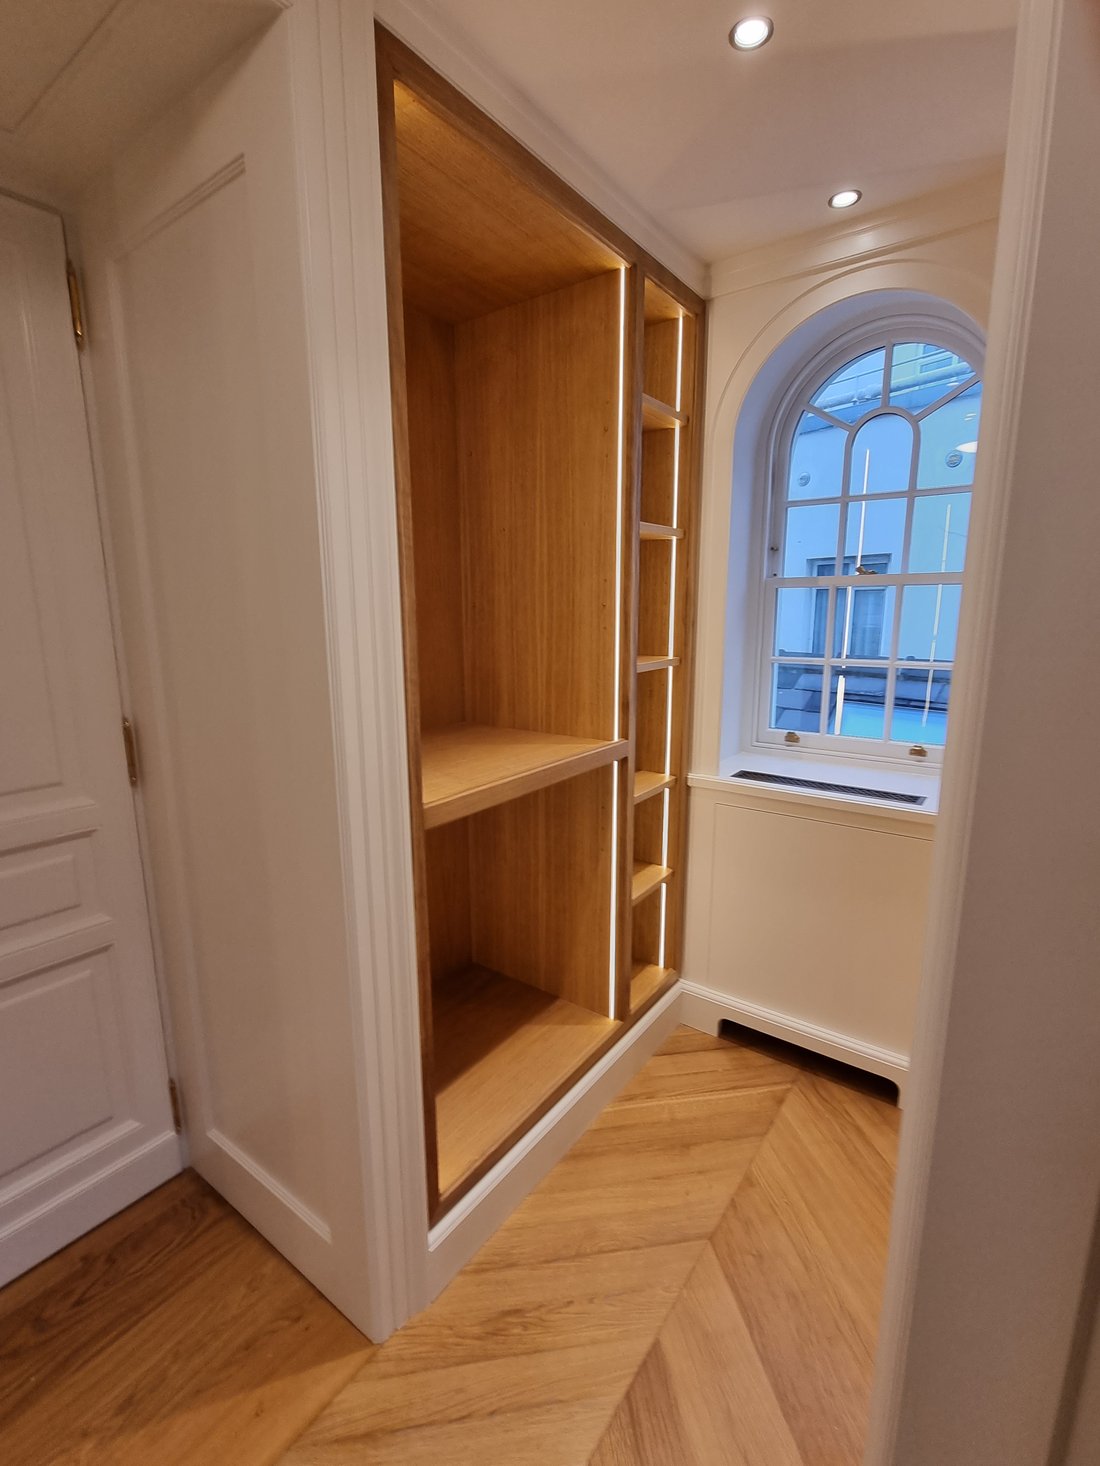 Main header - "Fitted Wardrobes London"